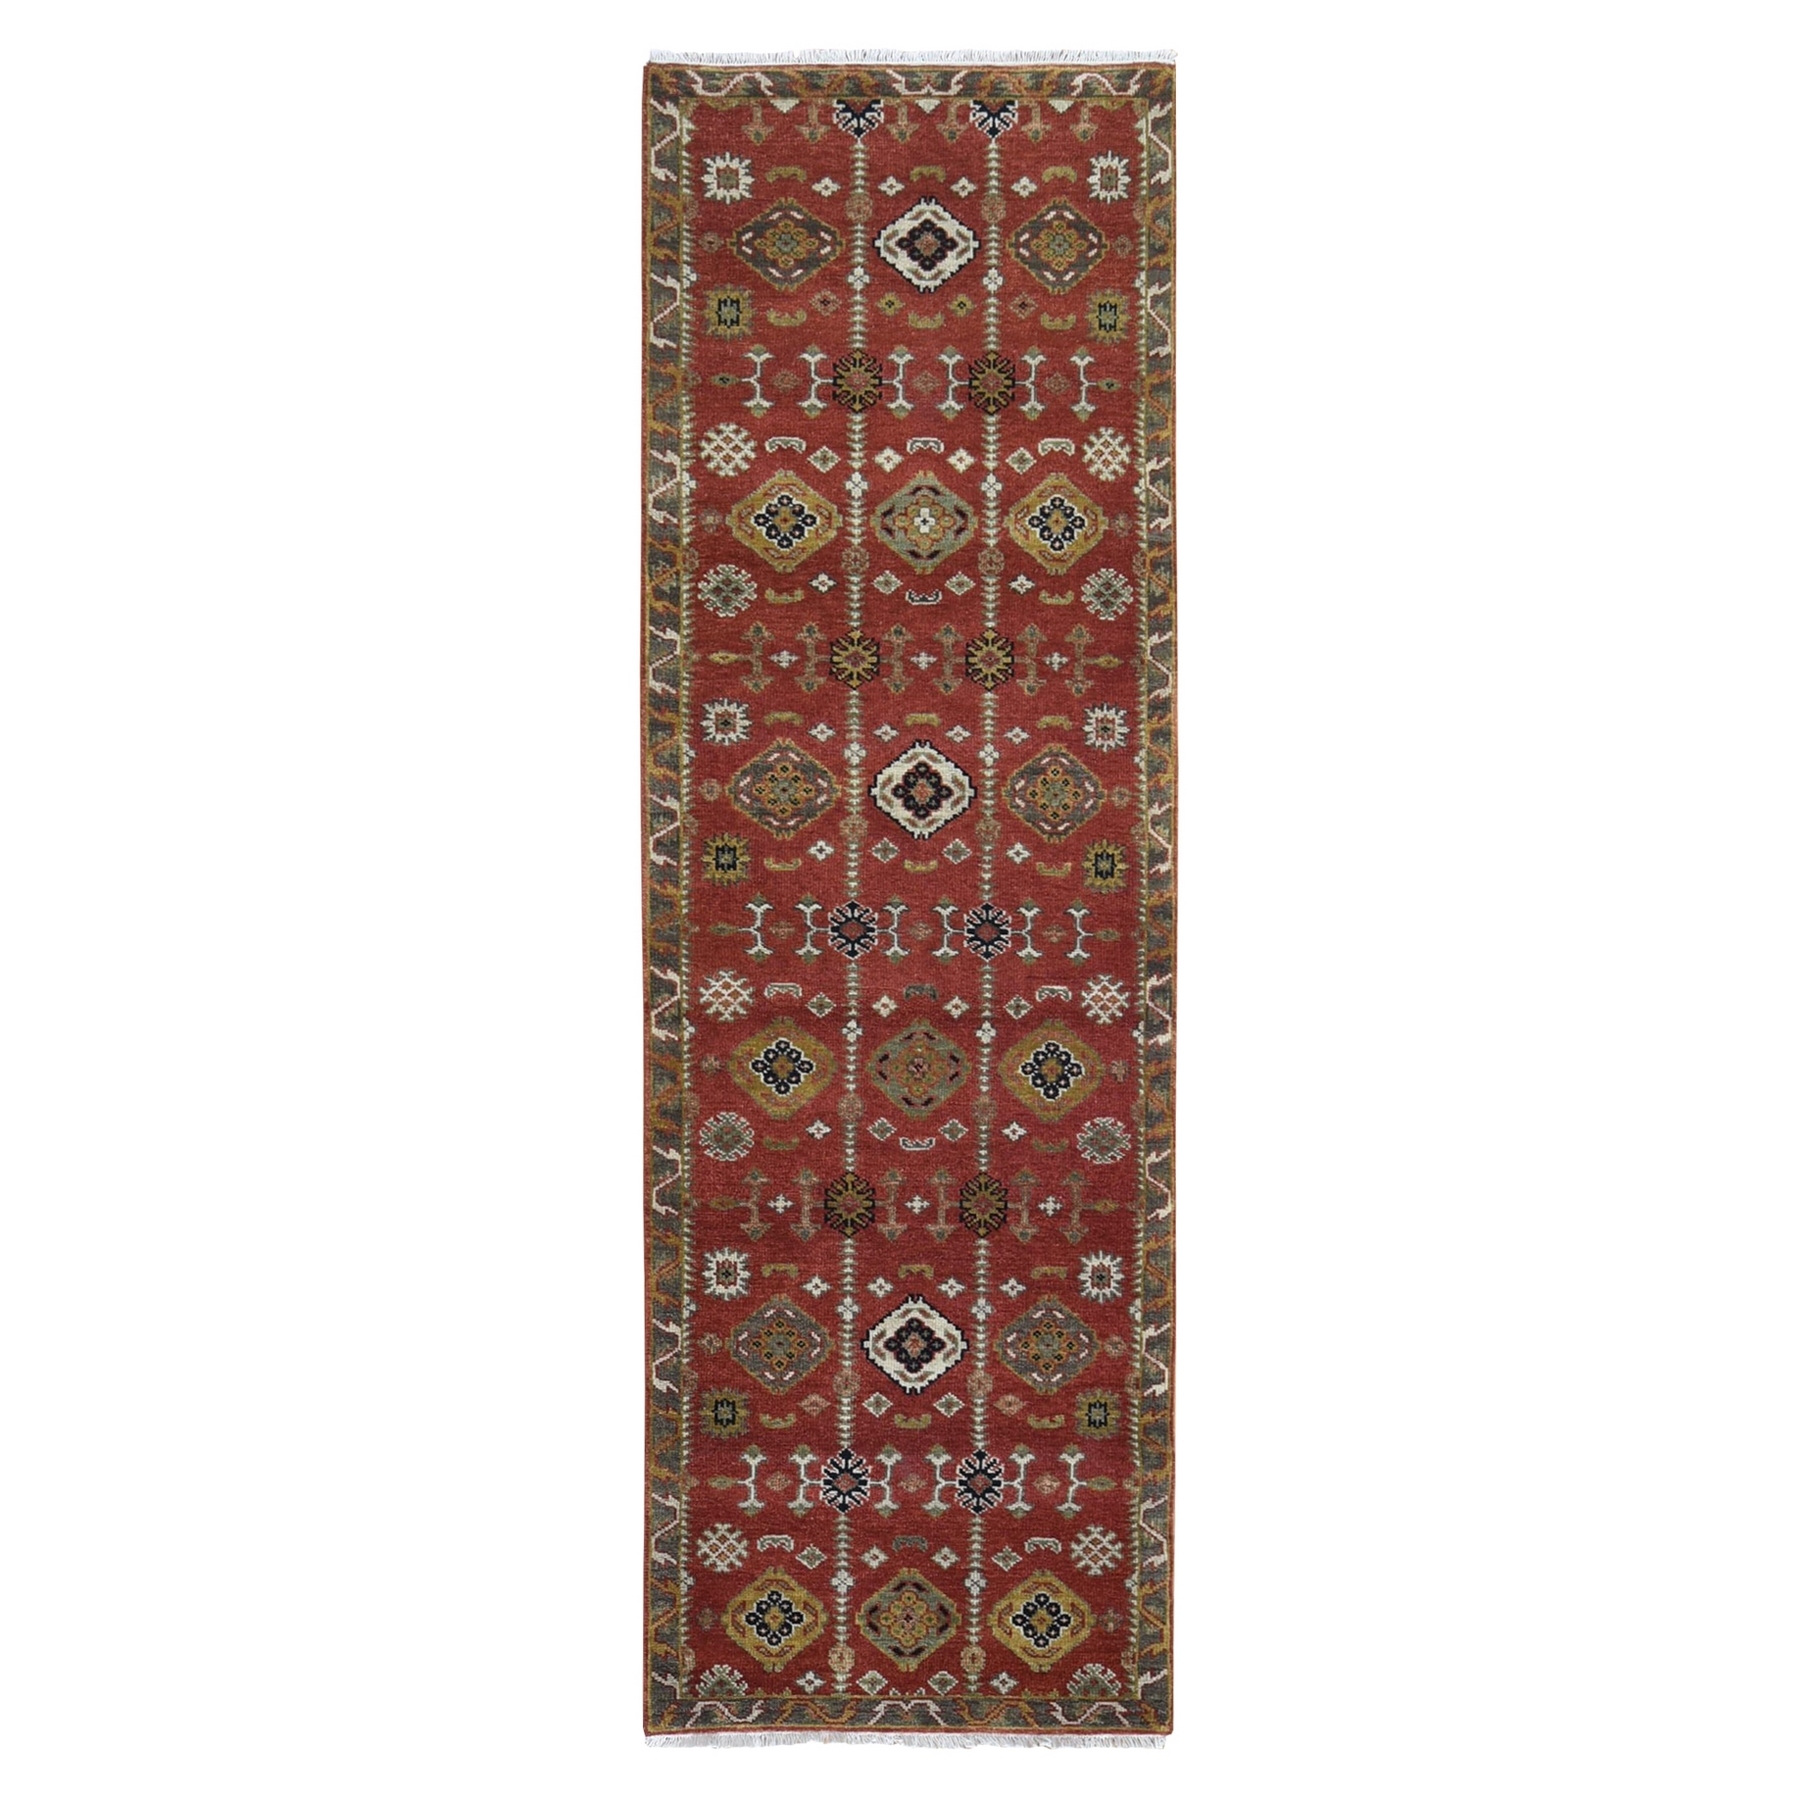 Nomadic And Village Collection Hand Knotted Red Rug No: 1132380